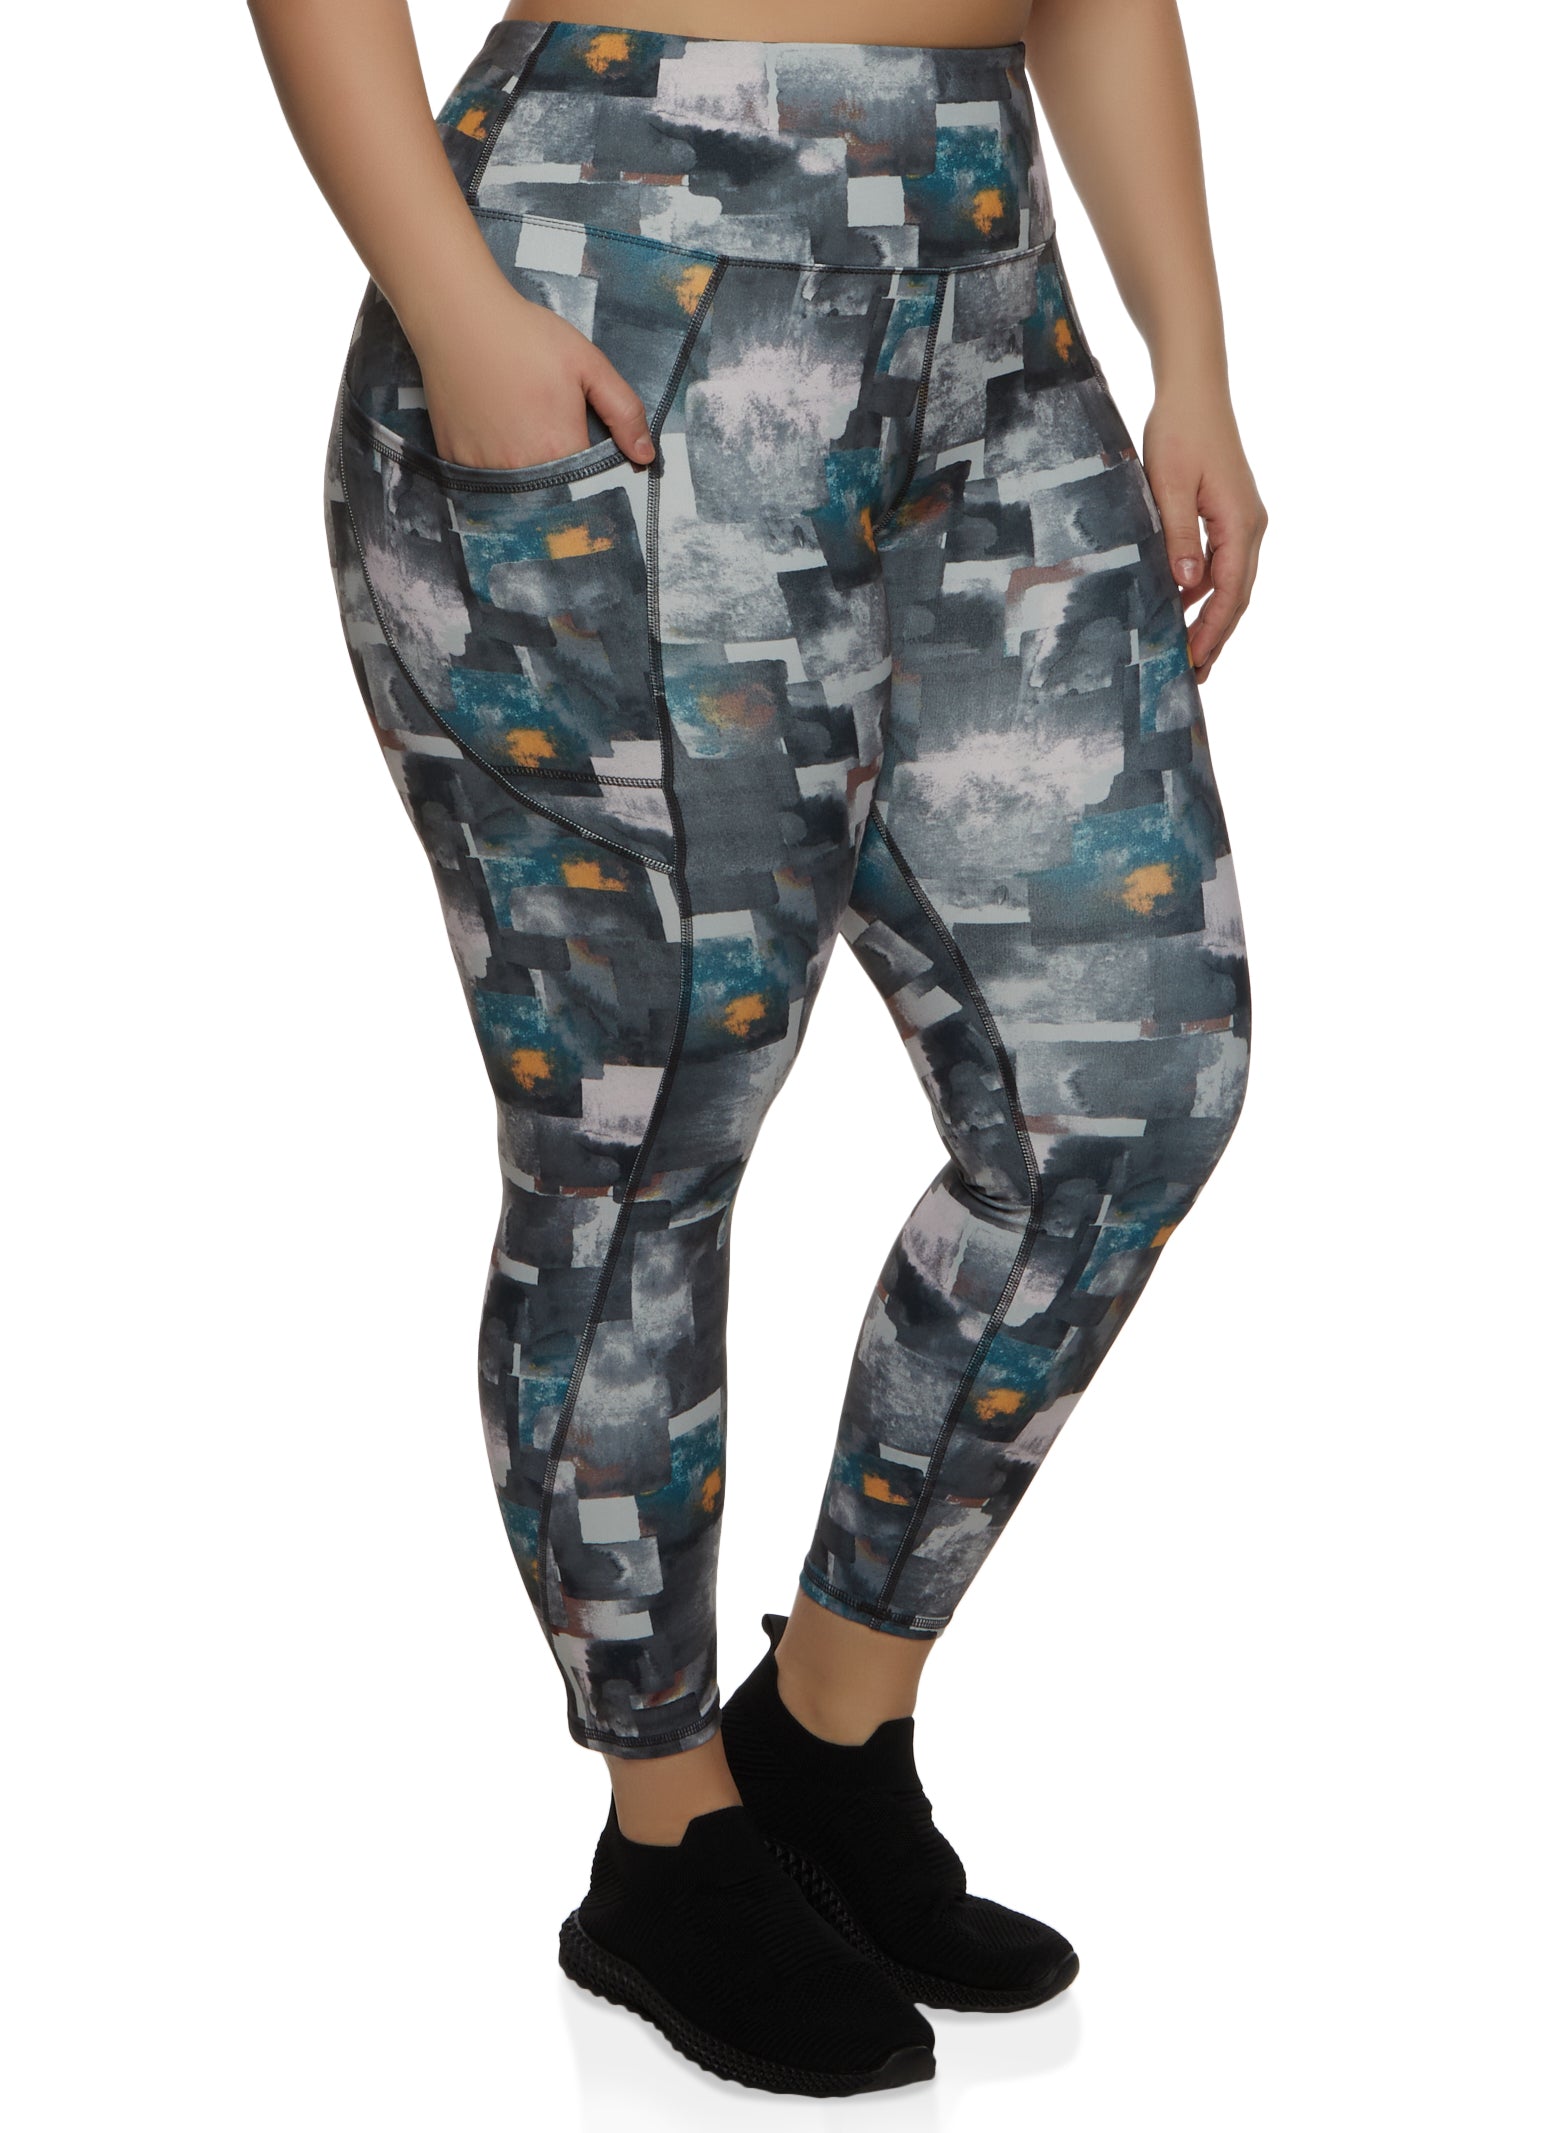 Plus Size Printed Leggings, Everyday Low Prices